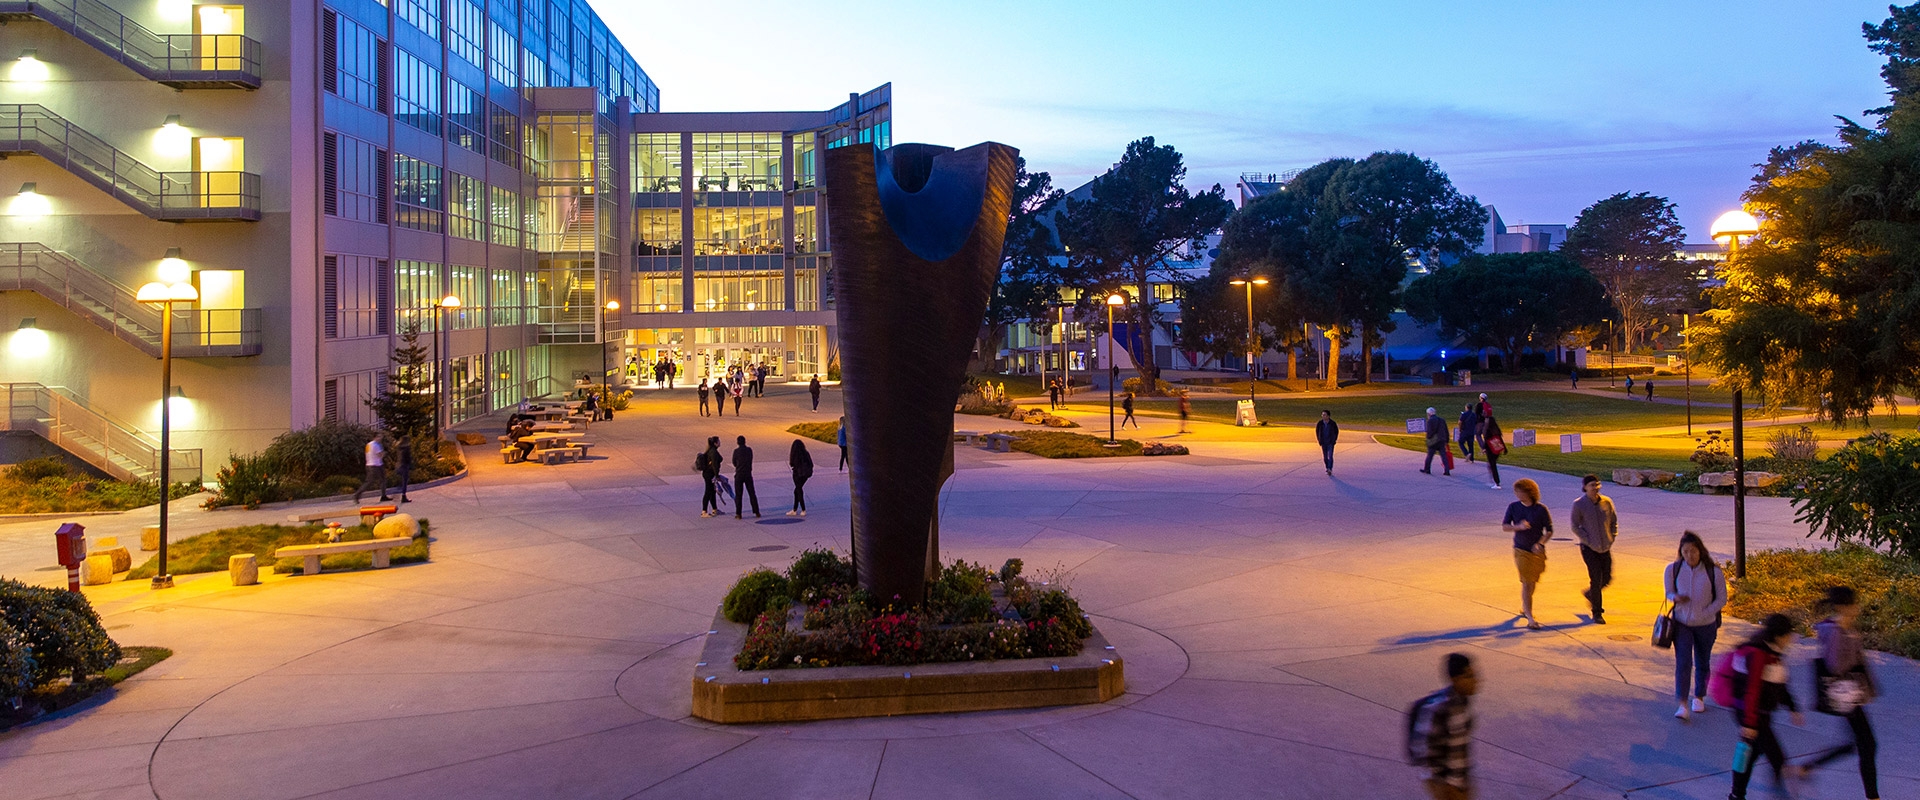 SF State campus sculpture and library at twilight